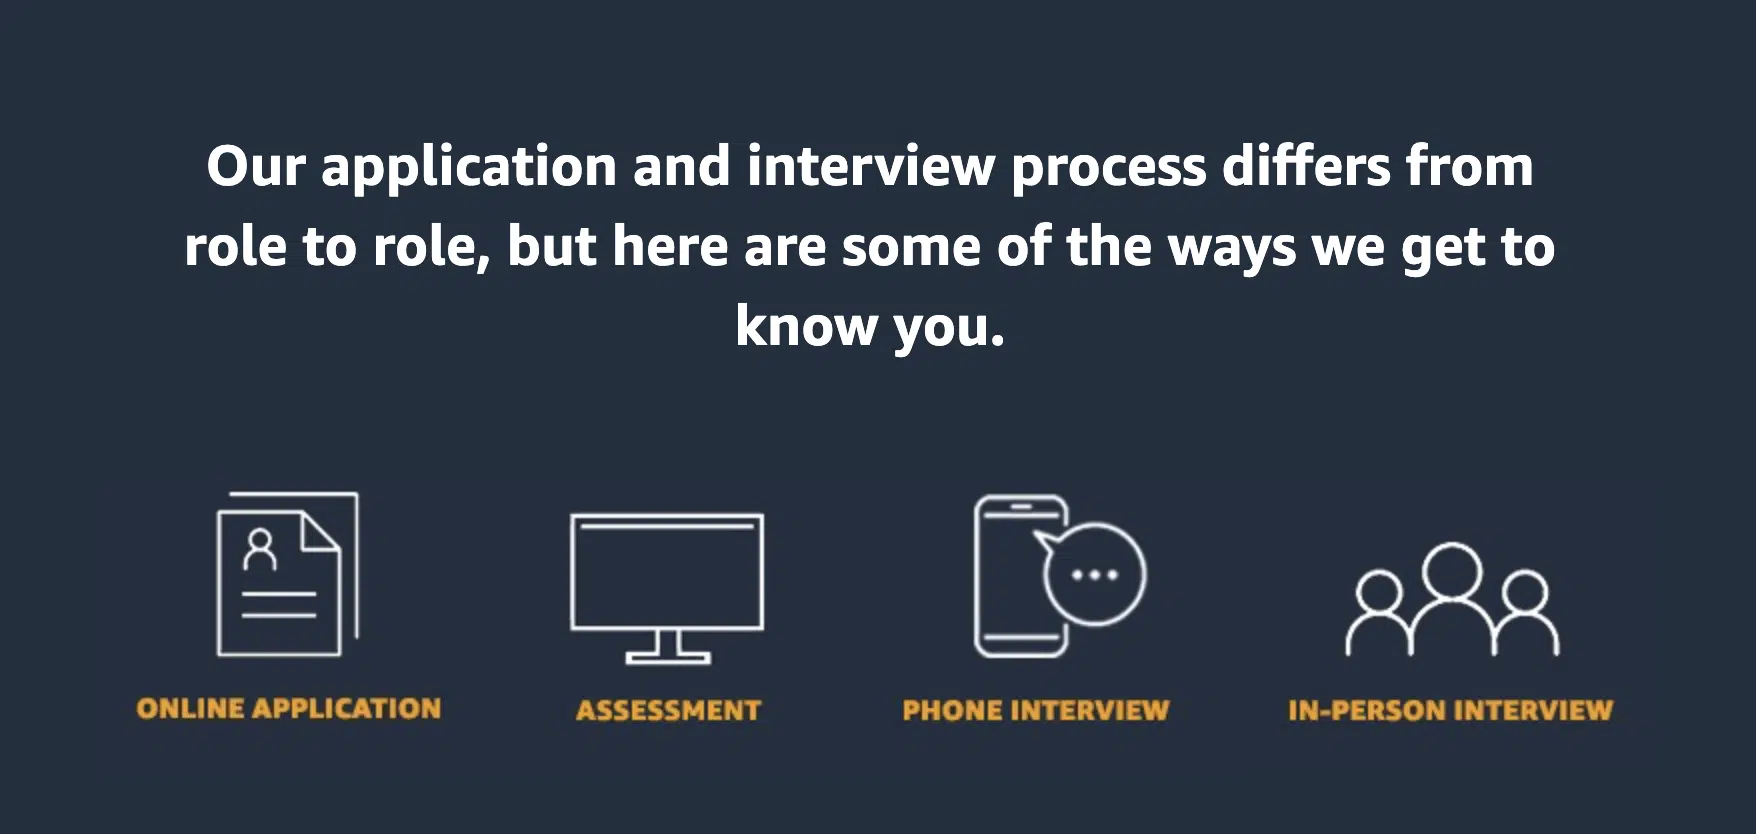 Interviewing at Amazon